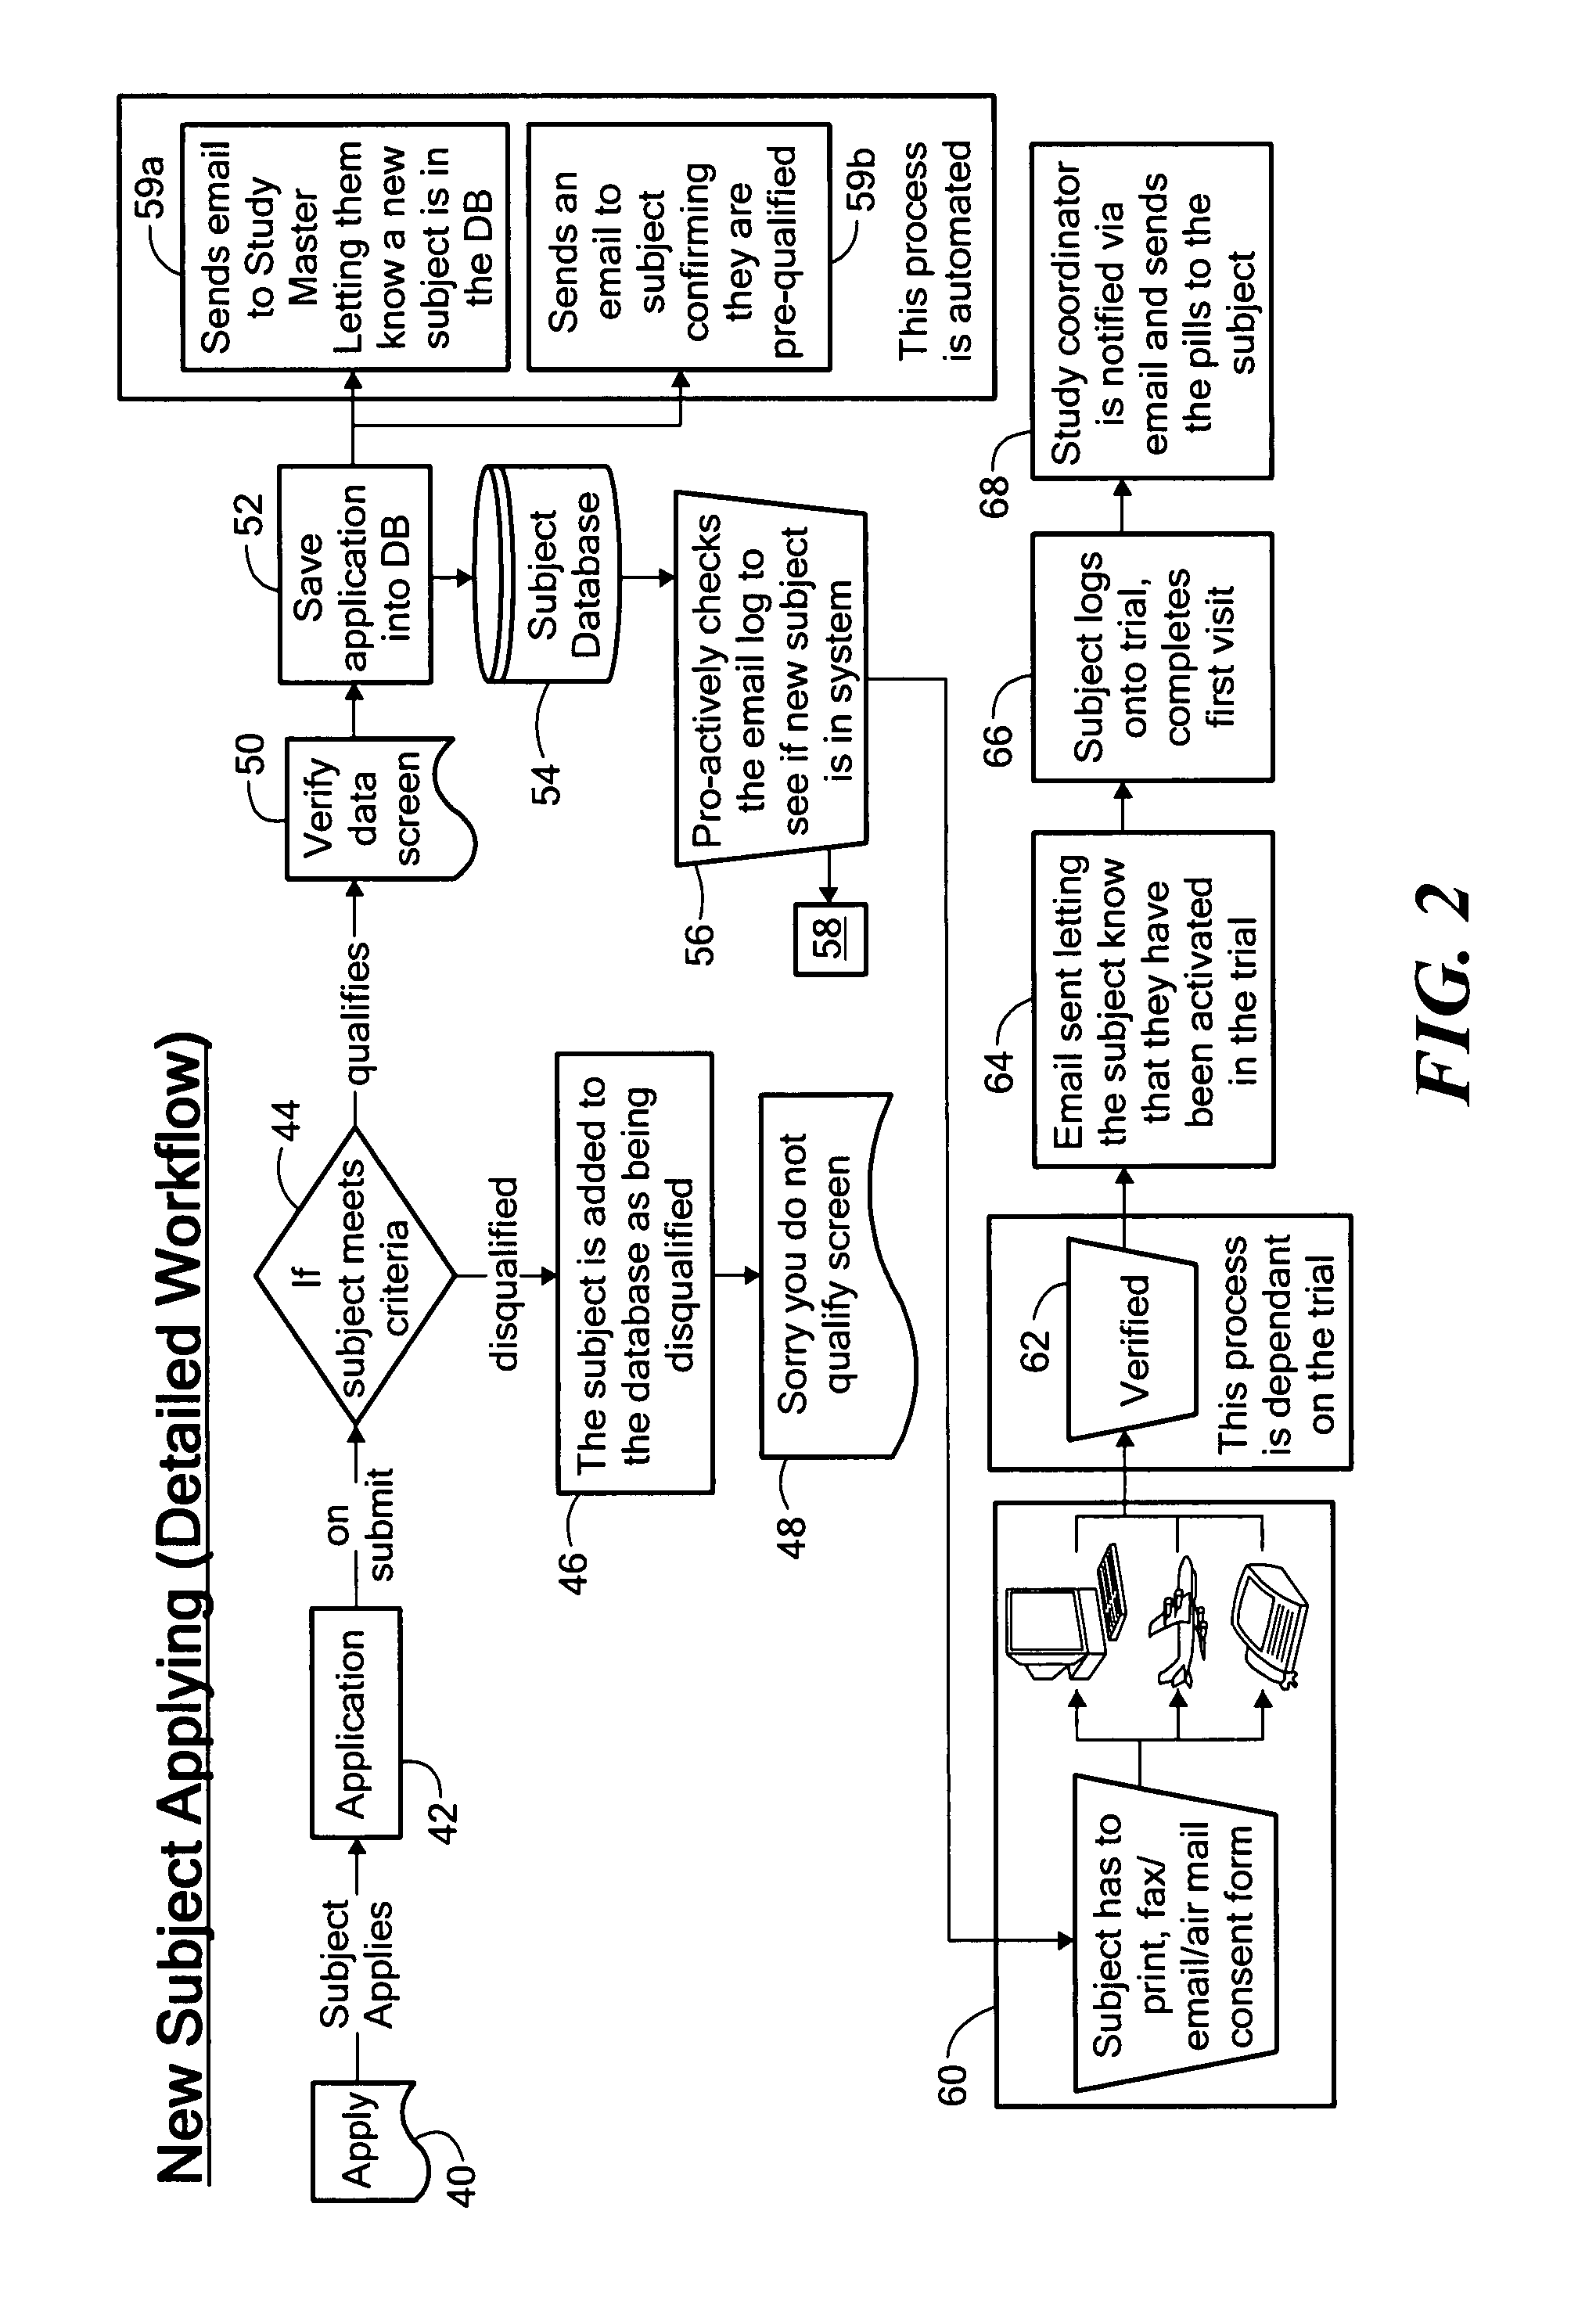 Method for conducting clinical trials over the internet